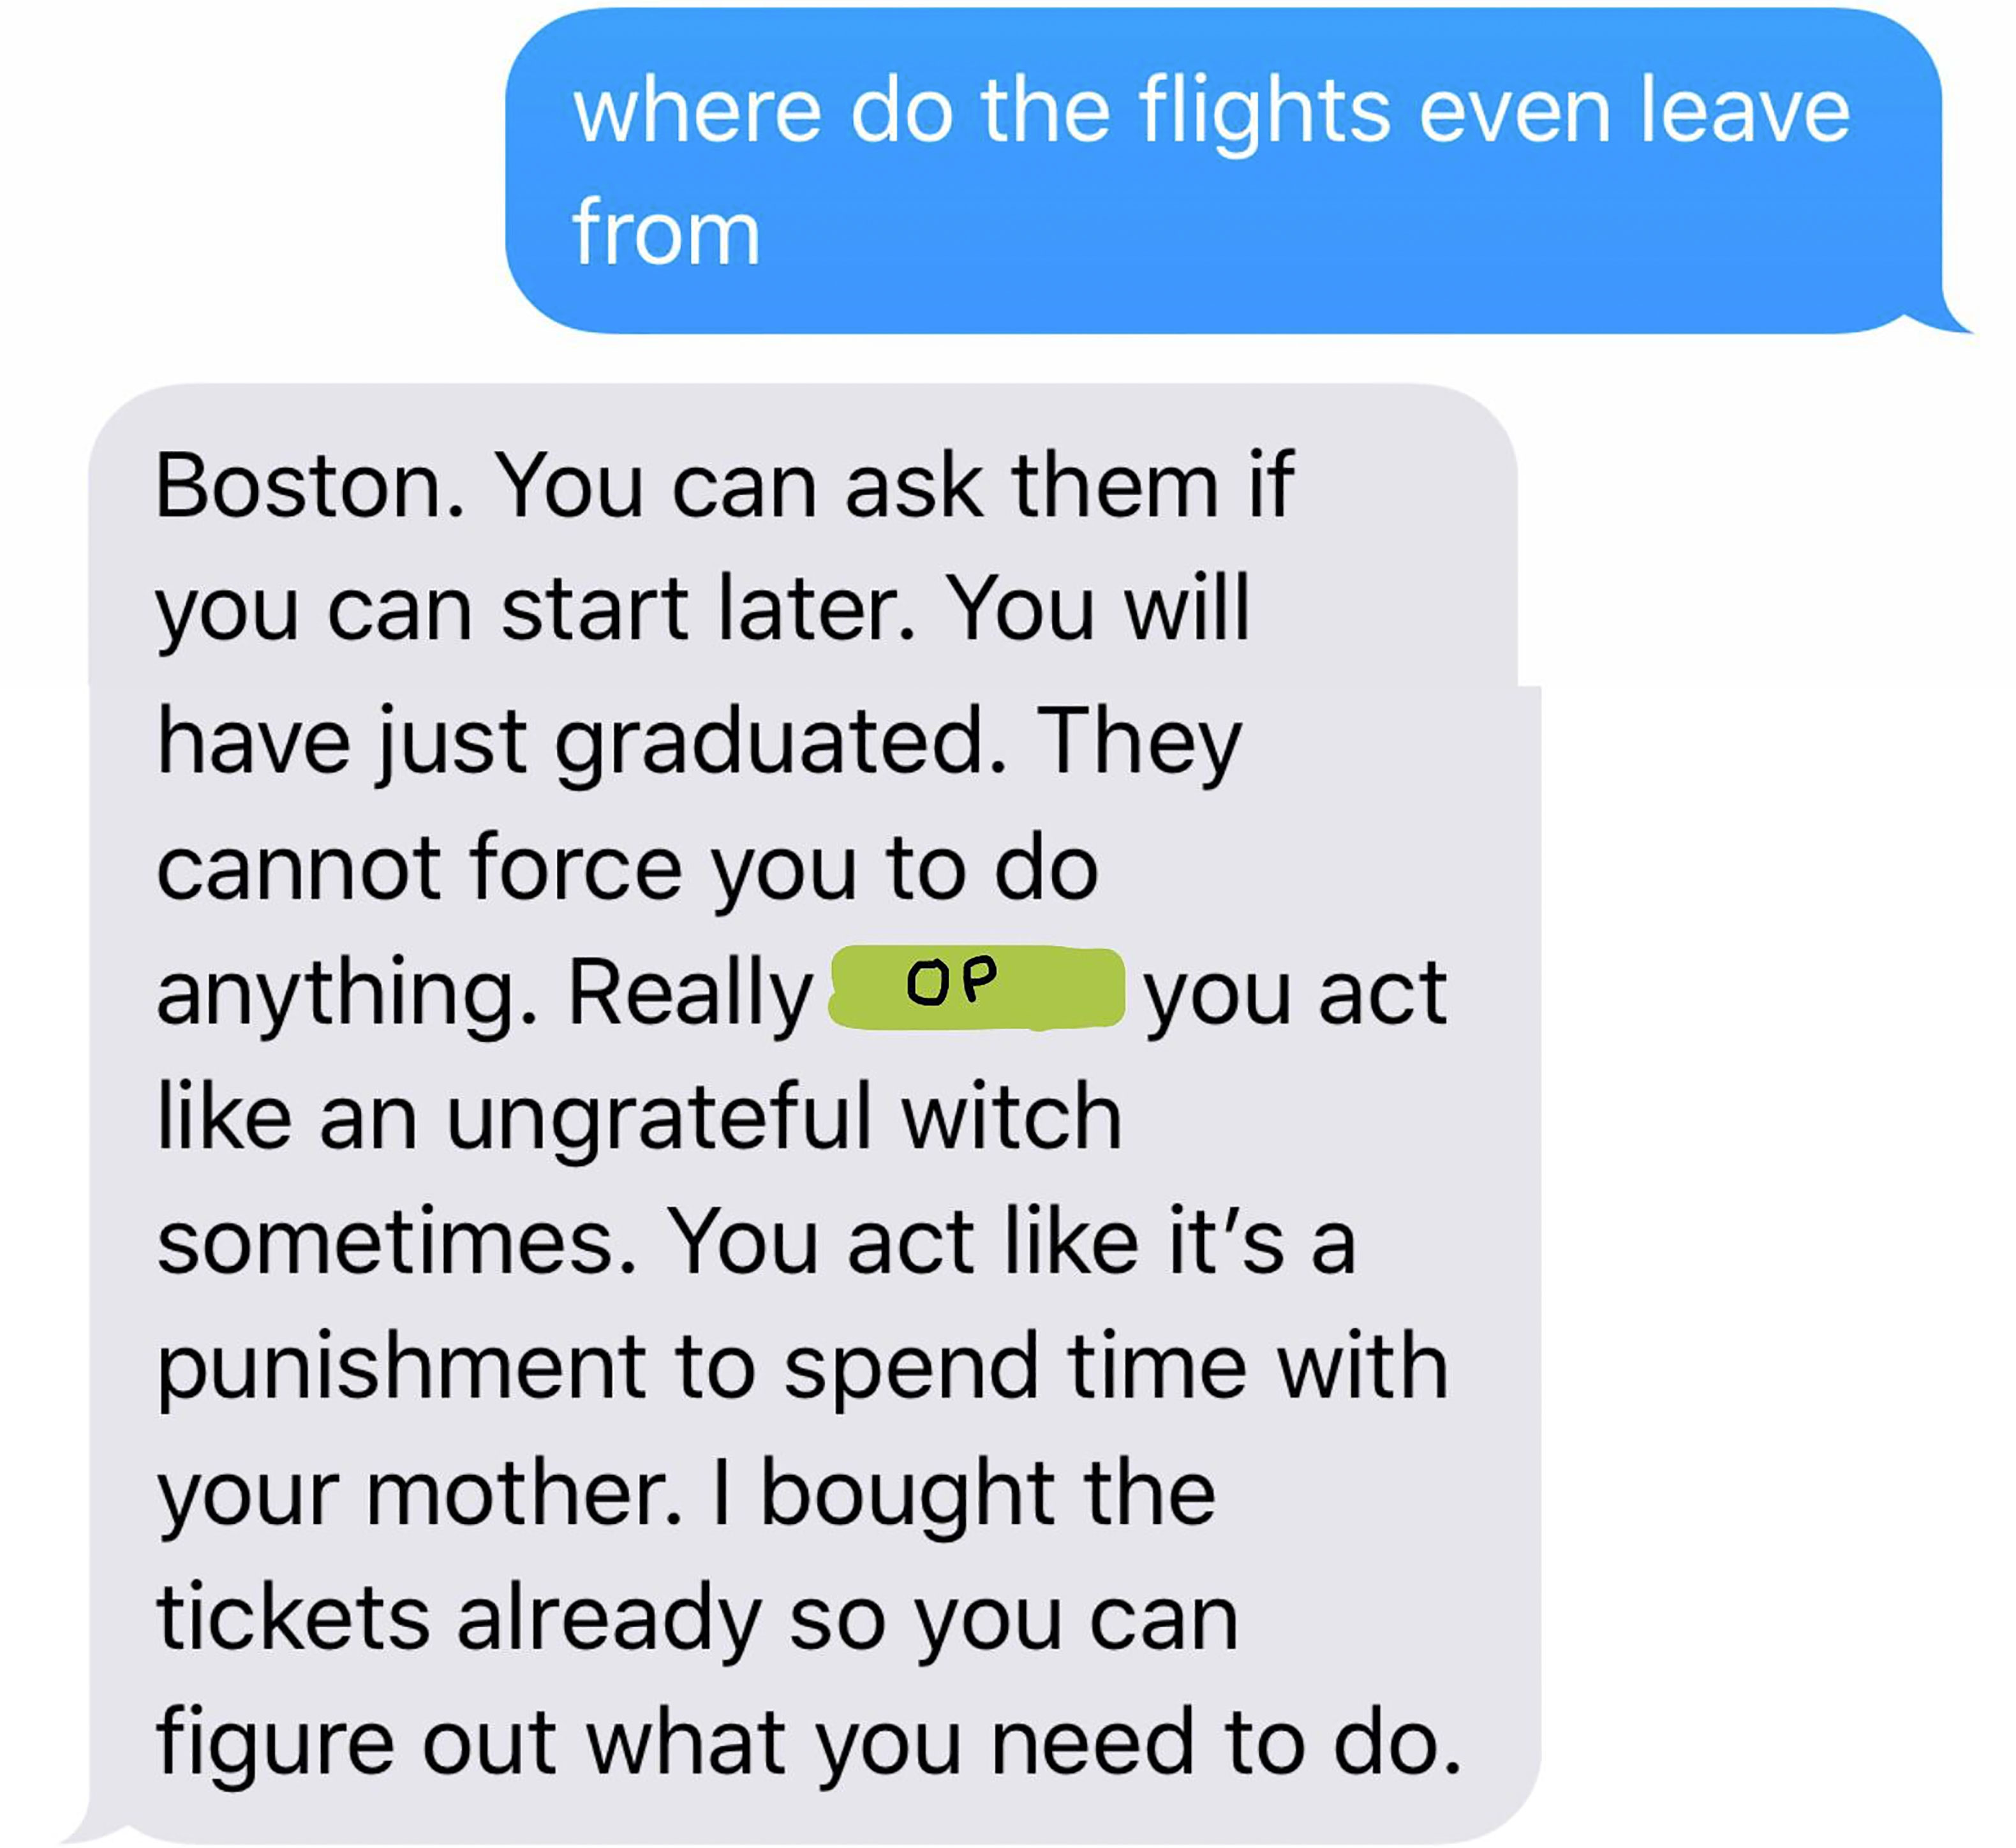 document - where do the flights even leave from Boston. You can ask them if you can start later. You will have just graduated. They cannot force you to do anything. Really Op you act an ungrateful witch sometimes. You act it's a punishment to spend time w